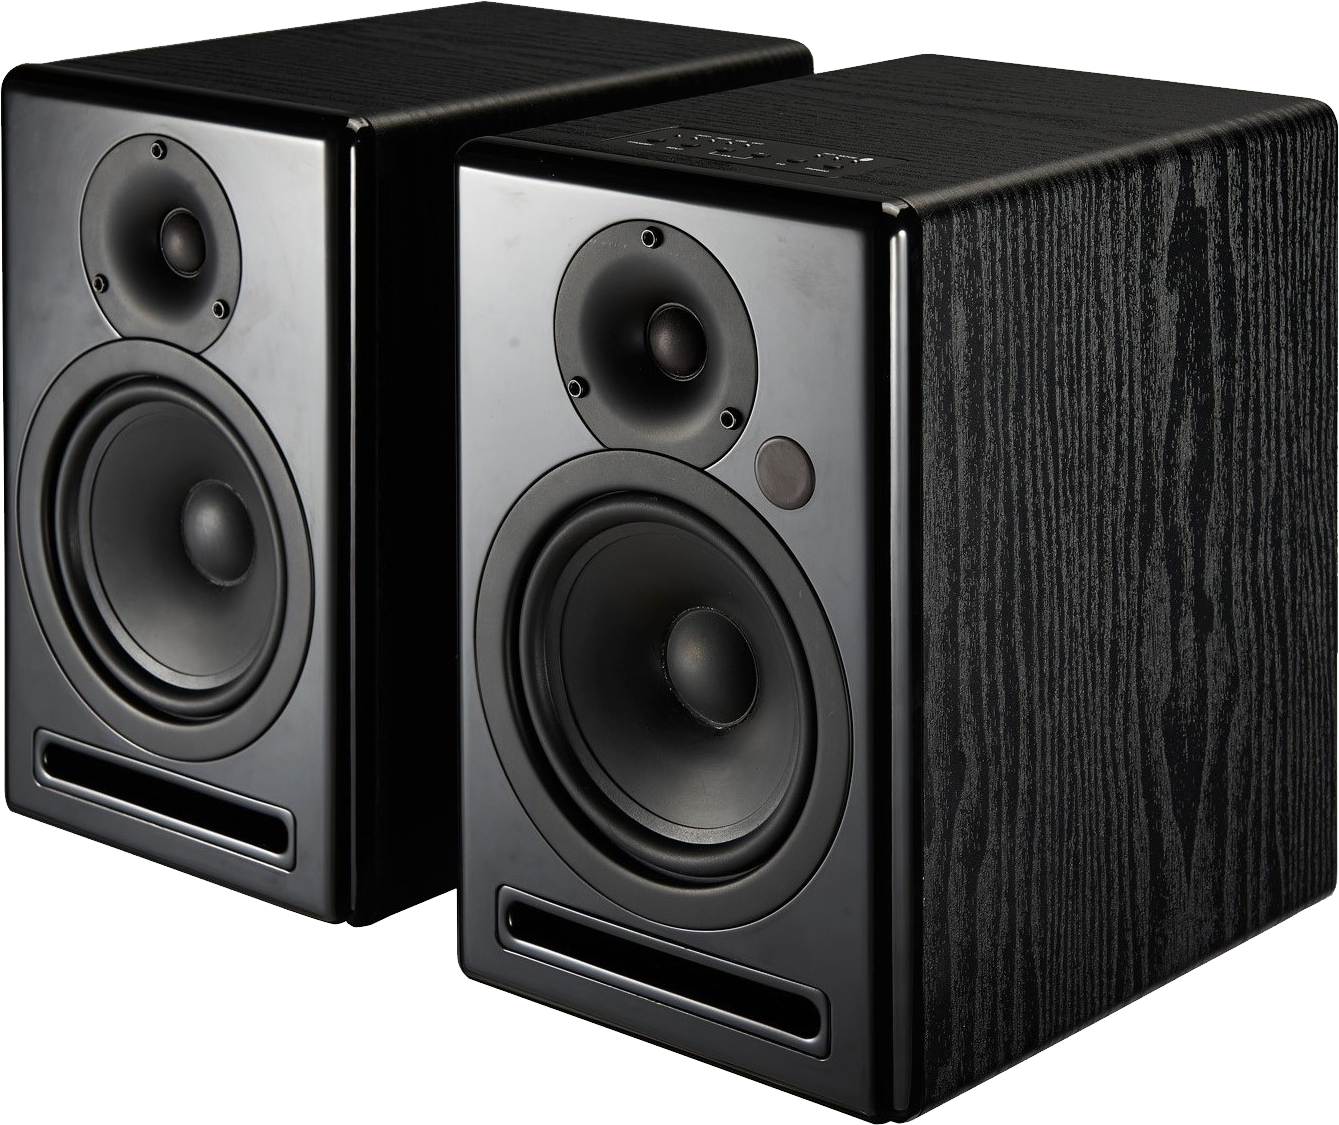 Bookshelf speaker system with a tweeter, woofer, and subwoofer in a single housing